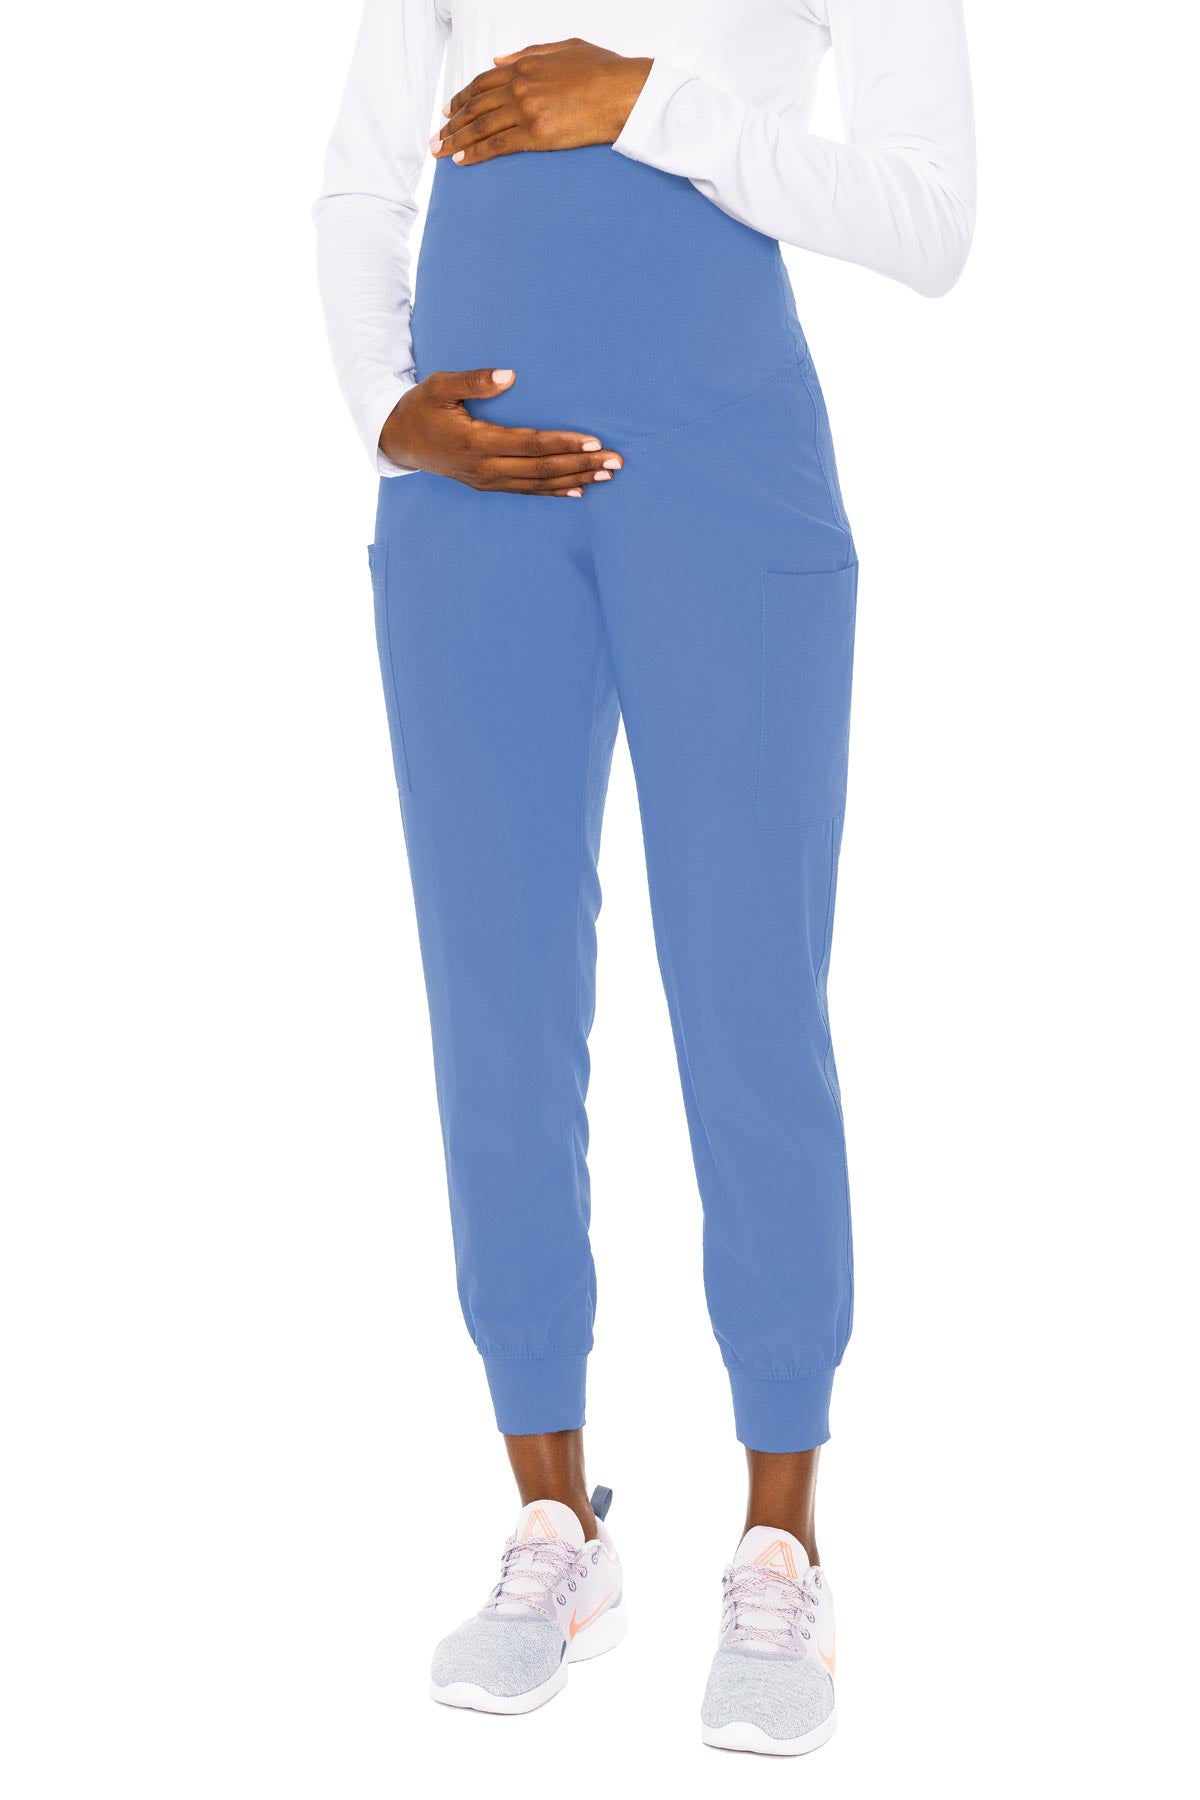 Med Couture Activate 8727 Maternity Pant